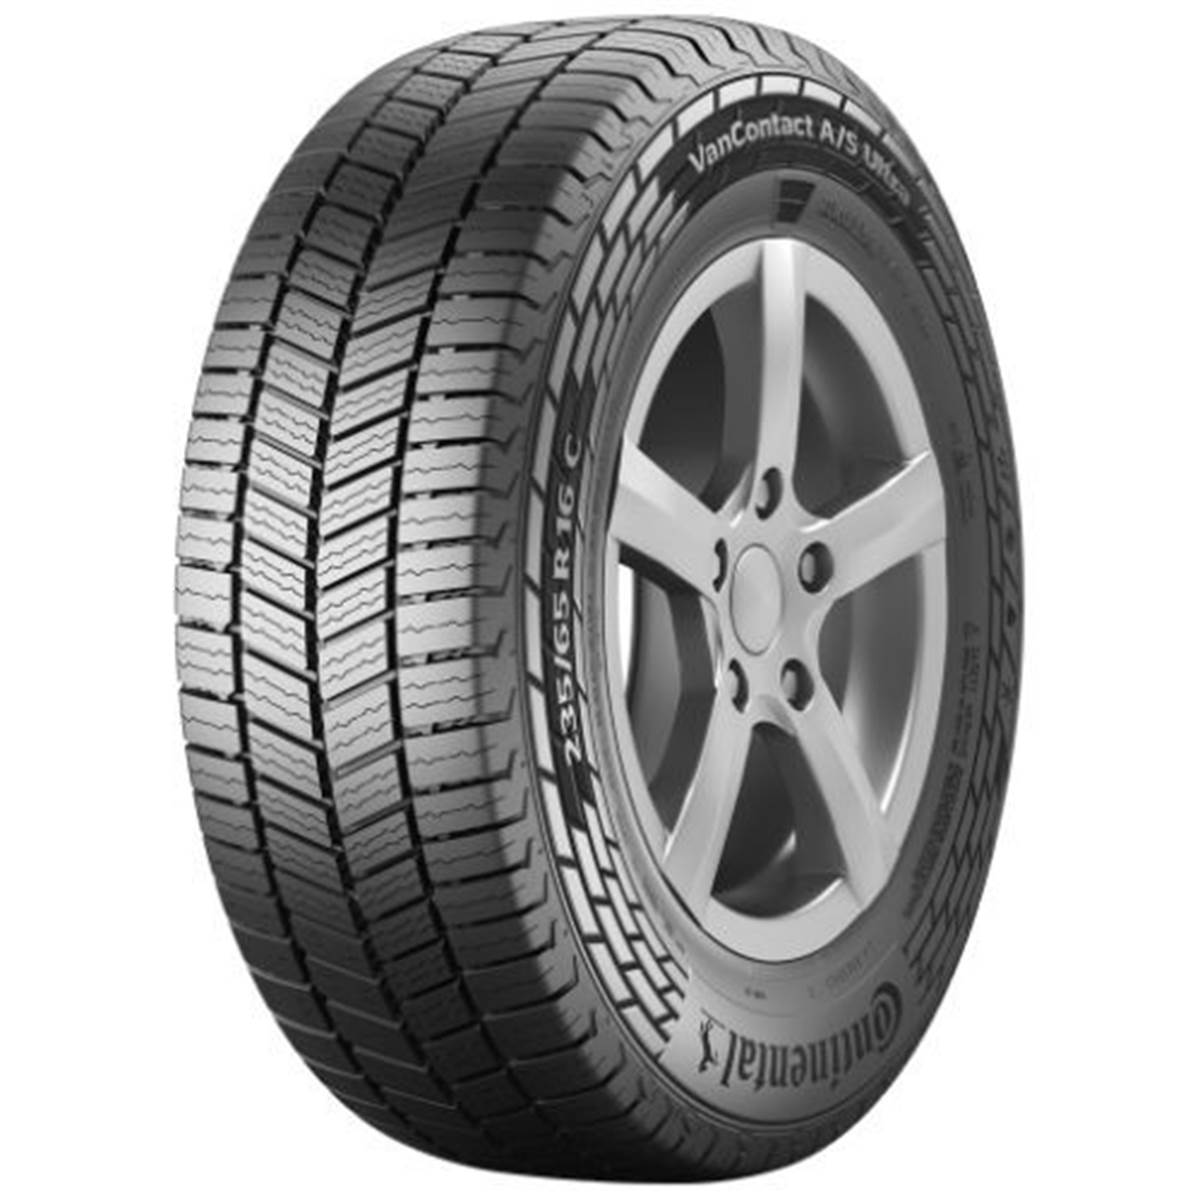 Continental Neumático  Vancontact A/S Ultra 195/65R16 104T